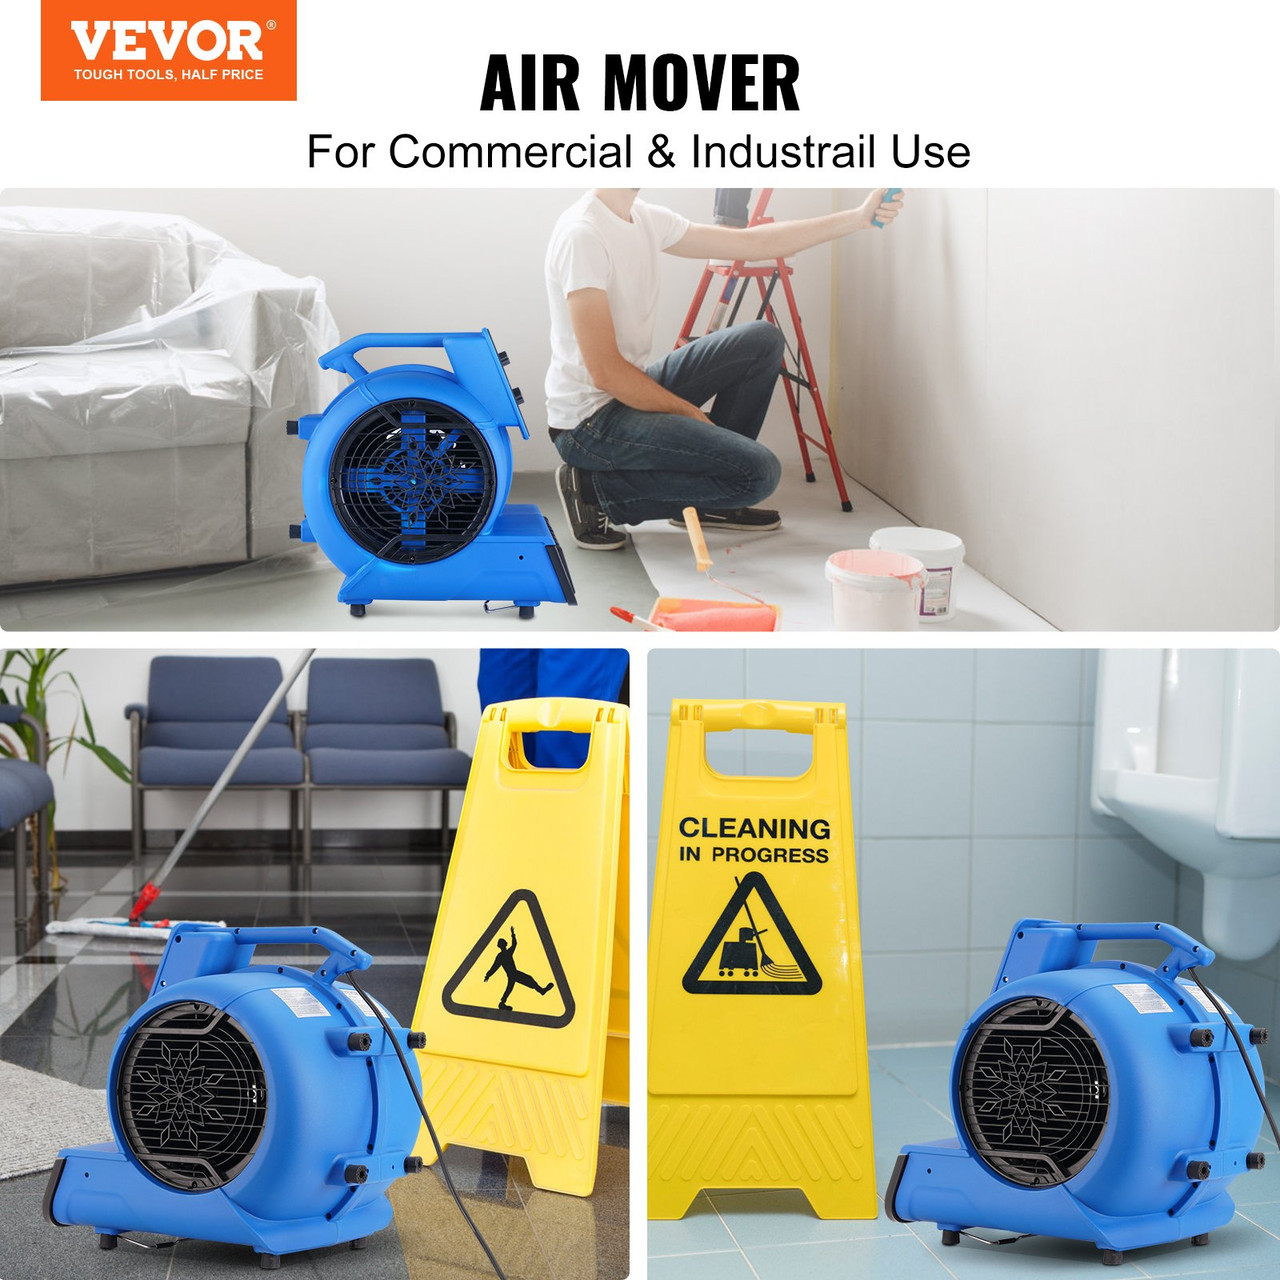 Floor Blower, 1/2 HP, 2600 CFM Air Mover for Drying and Cooling, Portable Carpet Dryer Fan with 4 Blowing Angles and Time Function, for Janitorial, Home, Commercial, Industrail Use, ETL Listed